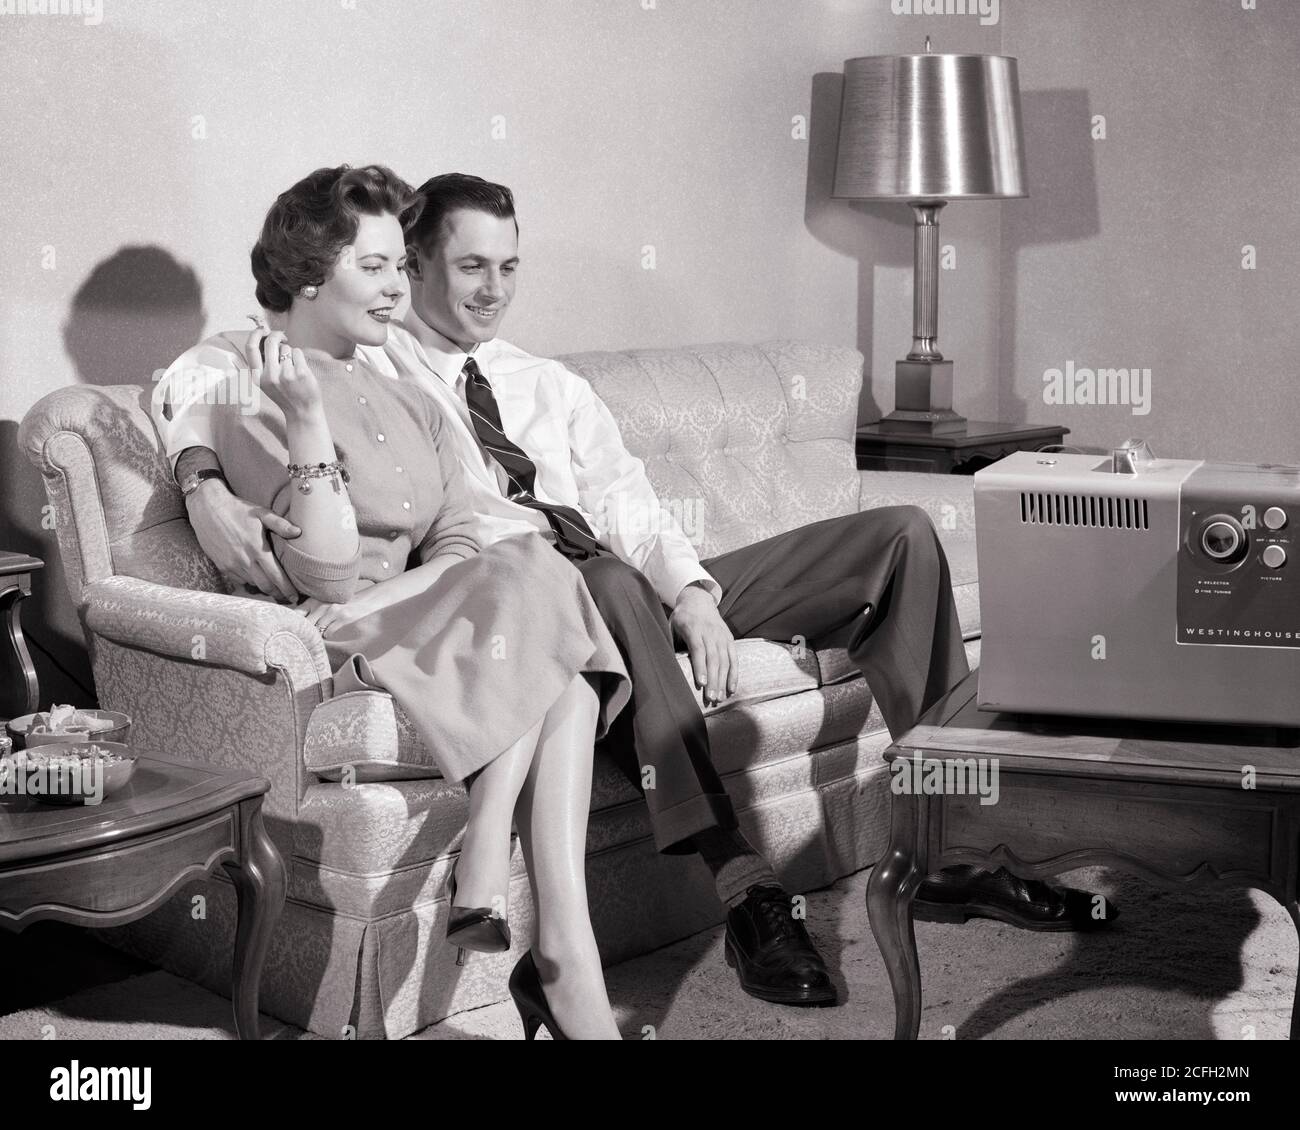 1950s CONTENTED COUPLE MAN WOMAN HUSBAND WIFE SITTING ON COUCH IN LIVING ROOM SMOKING WATCHING PORTABLE TELEVISION SET  - r518 HAR001 HARS COUCH COMMUNICATION PEACE BALANCE INFORMATION PLEASED JOY LIFESTYLE SATISFACTION FEMALES MARRIED SPOUSE HUSBANDS HOME LIFE COPY SPACE FULL-LENGTH LADIES PERSONS MALES ENTERTAINMENT PORTABLE B&W PARTNER WIDE ANGLE DREAMS HAPPINESS CHEERFUL PROTECTION NETWORKING CHOICE EXCITEMENT RECREATION IN ON SMILES CONNECTION ENGROSSED CONCEPTUAL JOYFUL STYLISH CONTENTED MID-ADULT MID-ADULT MAN MID-ADULT WOMAN RELAXATION TOGETHERNESS WIVES ABSORBED BLACK AND WHITE Stock Photo